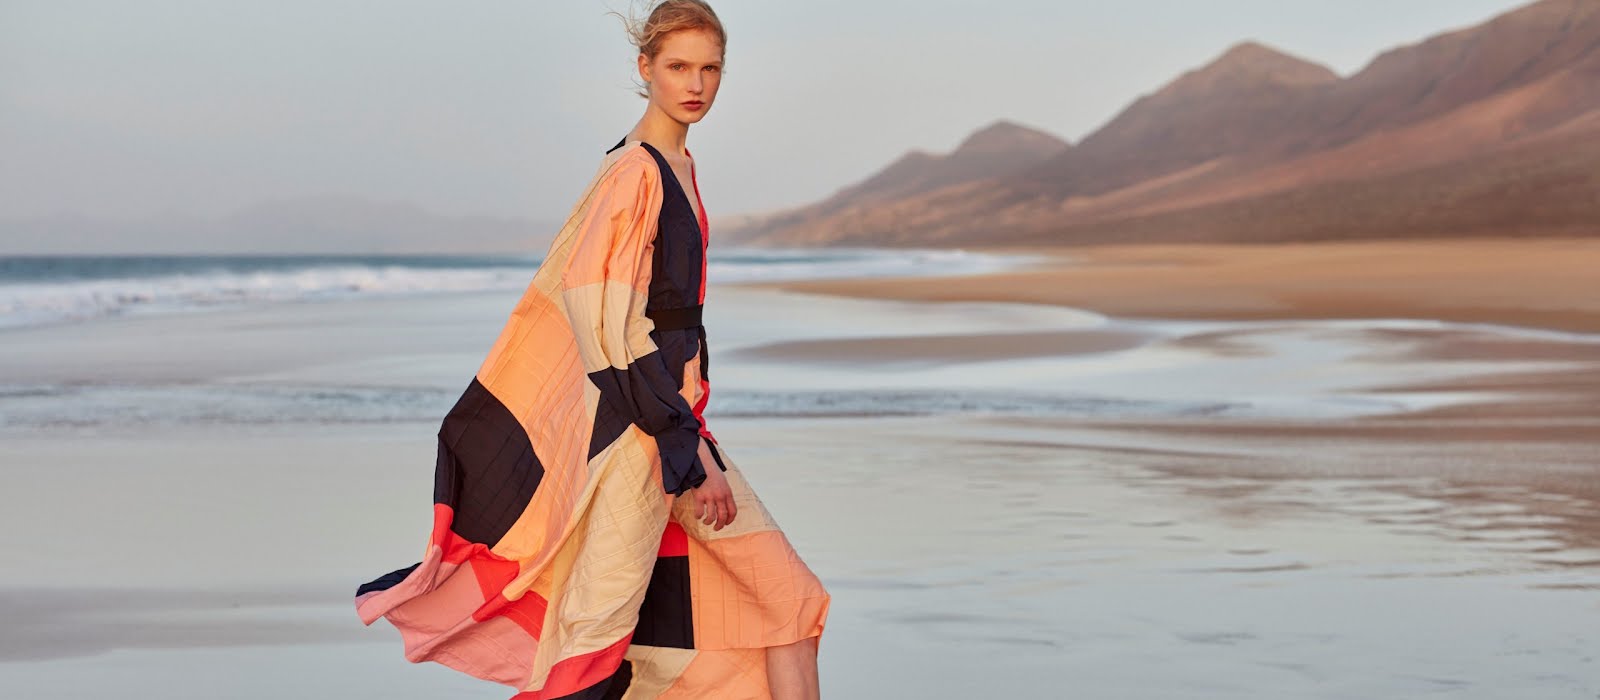 The Brown Thomas Spring Summer 2022 show has us planning our new-season wardrobes